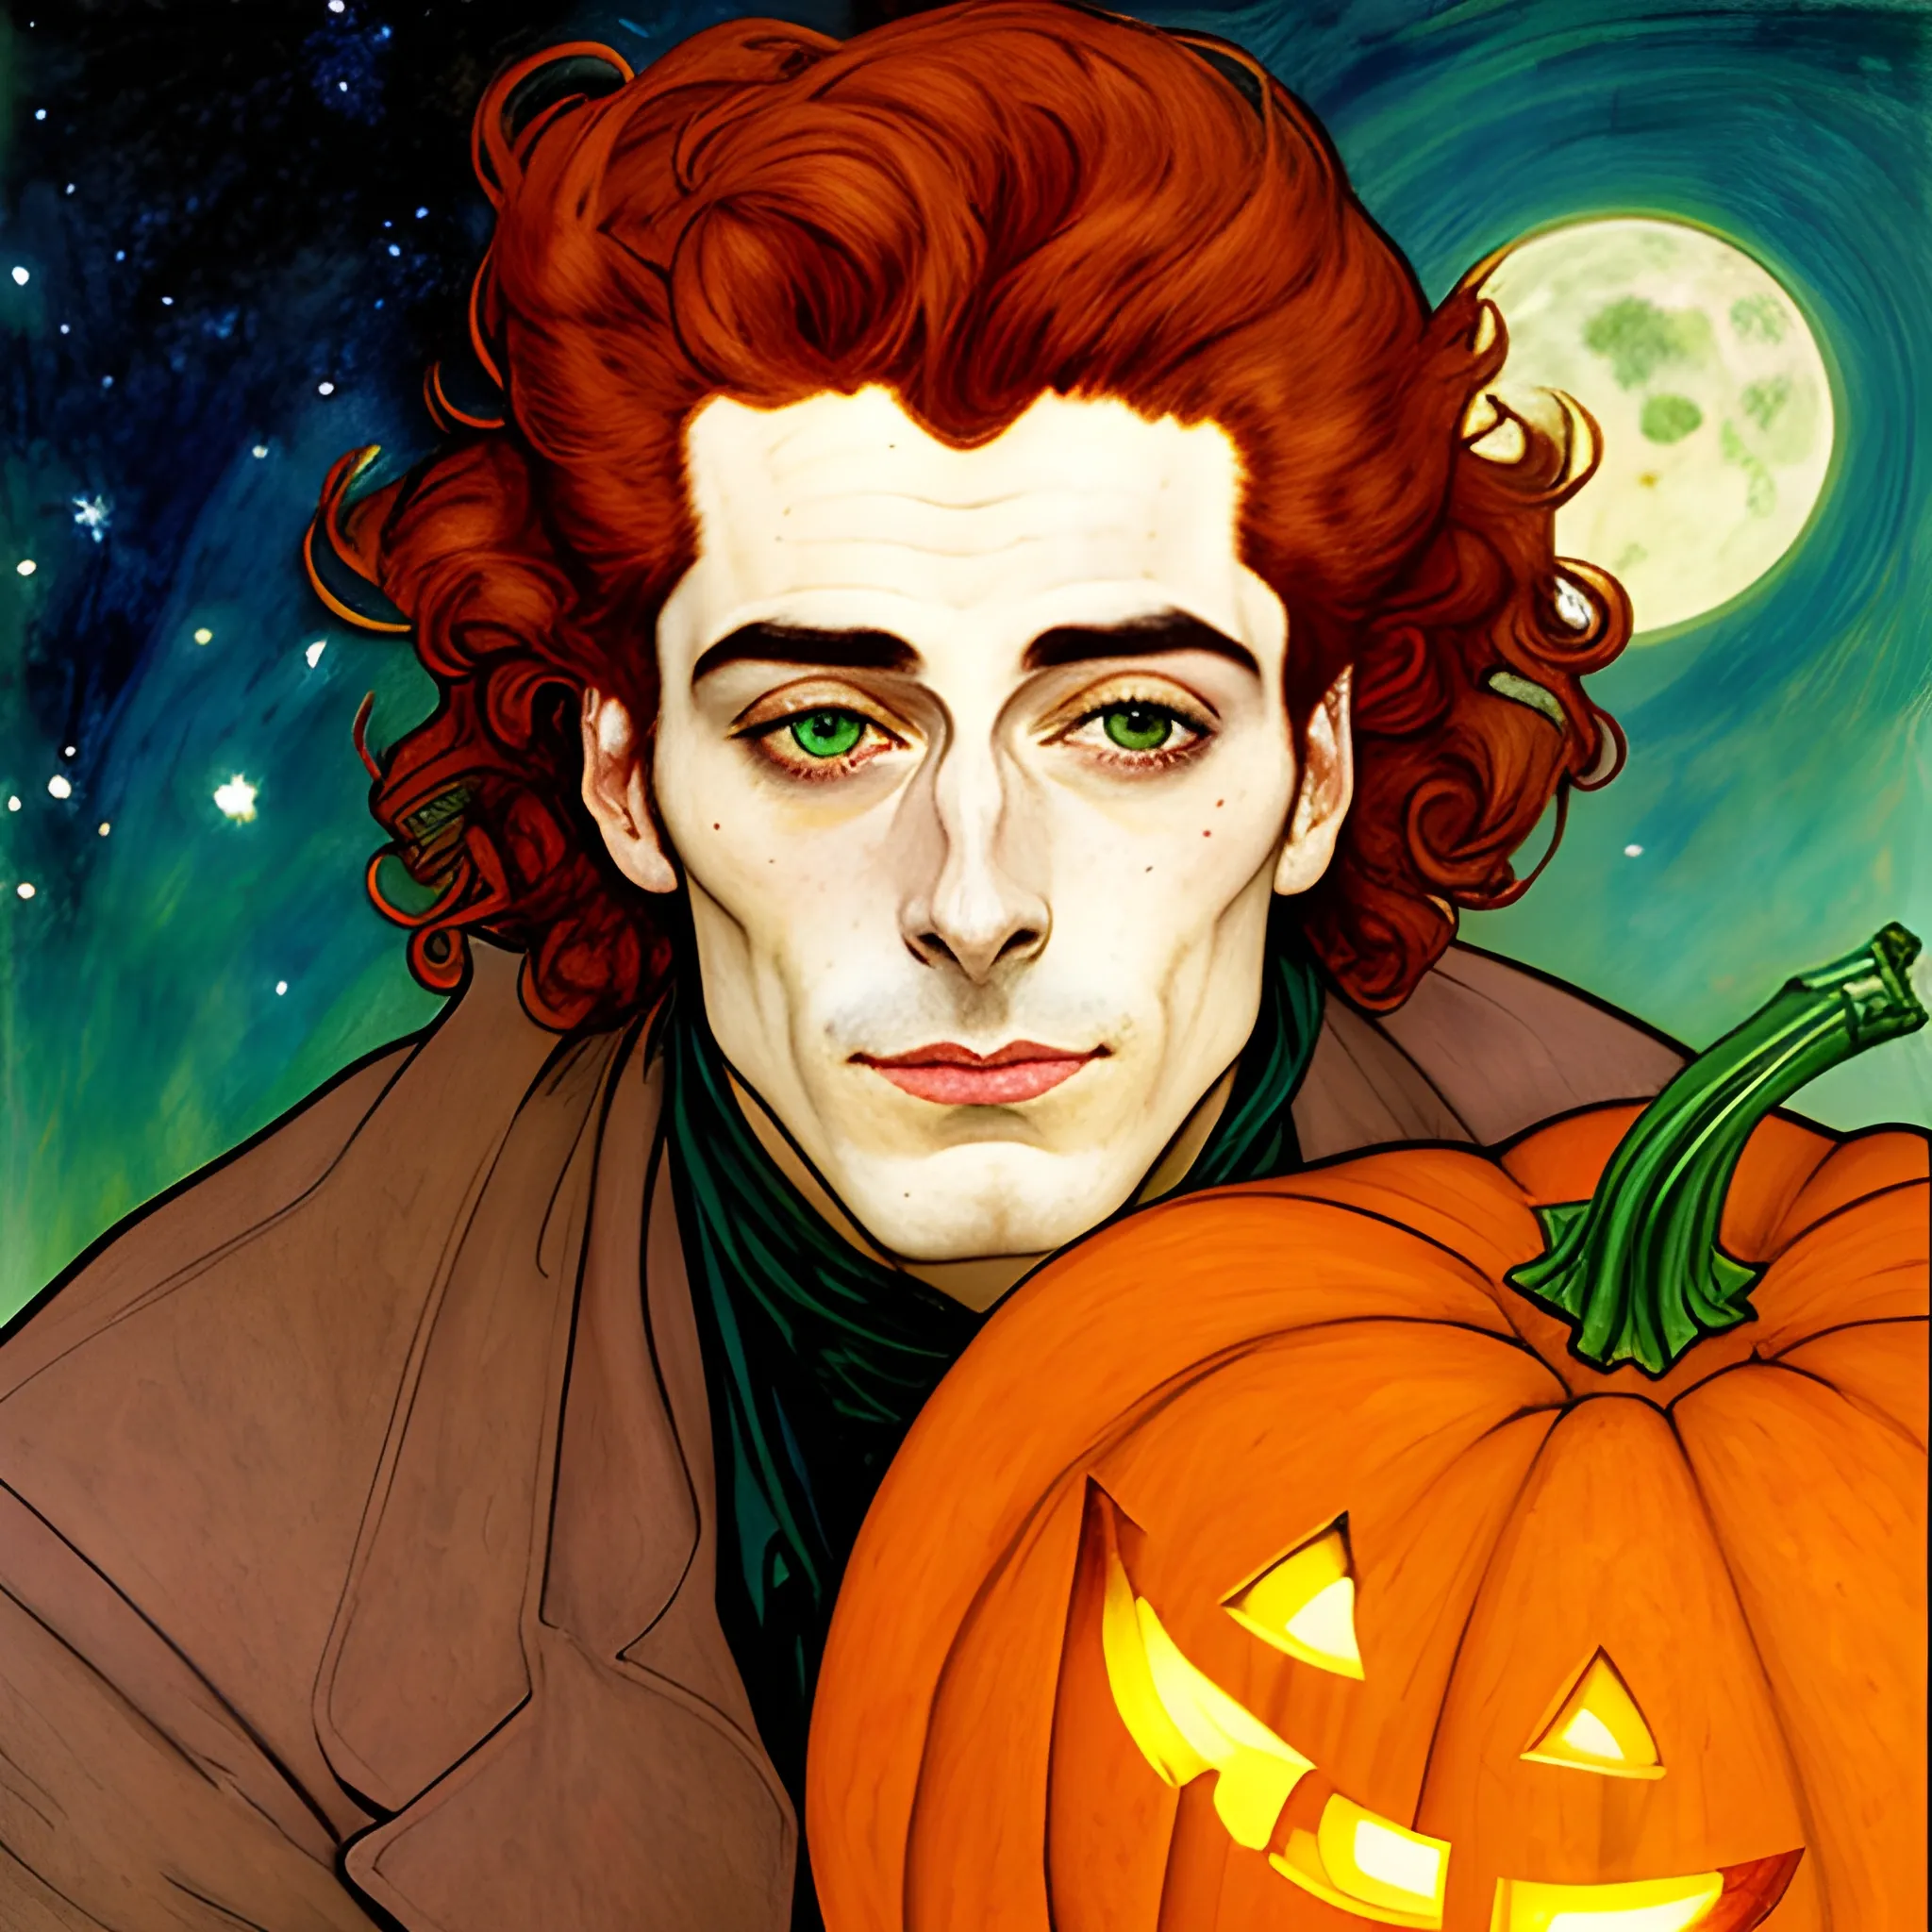 Painting of a handsome young delicate beautiful softly freckled man in his 20s with green eyes and long, curly red hair, at the giant jack o'lantern halloween party; pumpkins, perfect purple pumpkins, green skulls, orange bats, magic, candles, neon spray paint, acrylic paint, fantastical, elegant, stylized art, under a painted nebula sky, full moon; bats, pumpkins, spooky ambiance, Halloween Night art by alphonse mucha, vincent van gogh, egon schiele